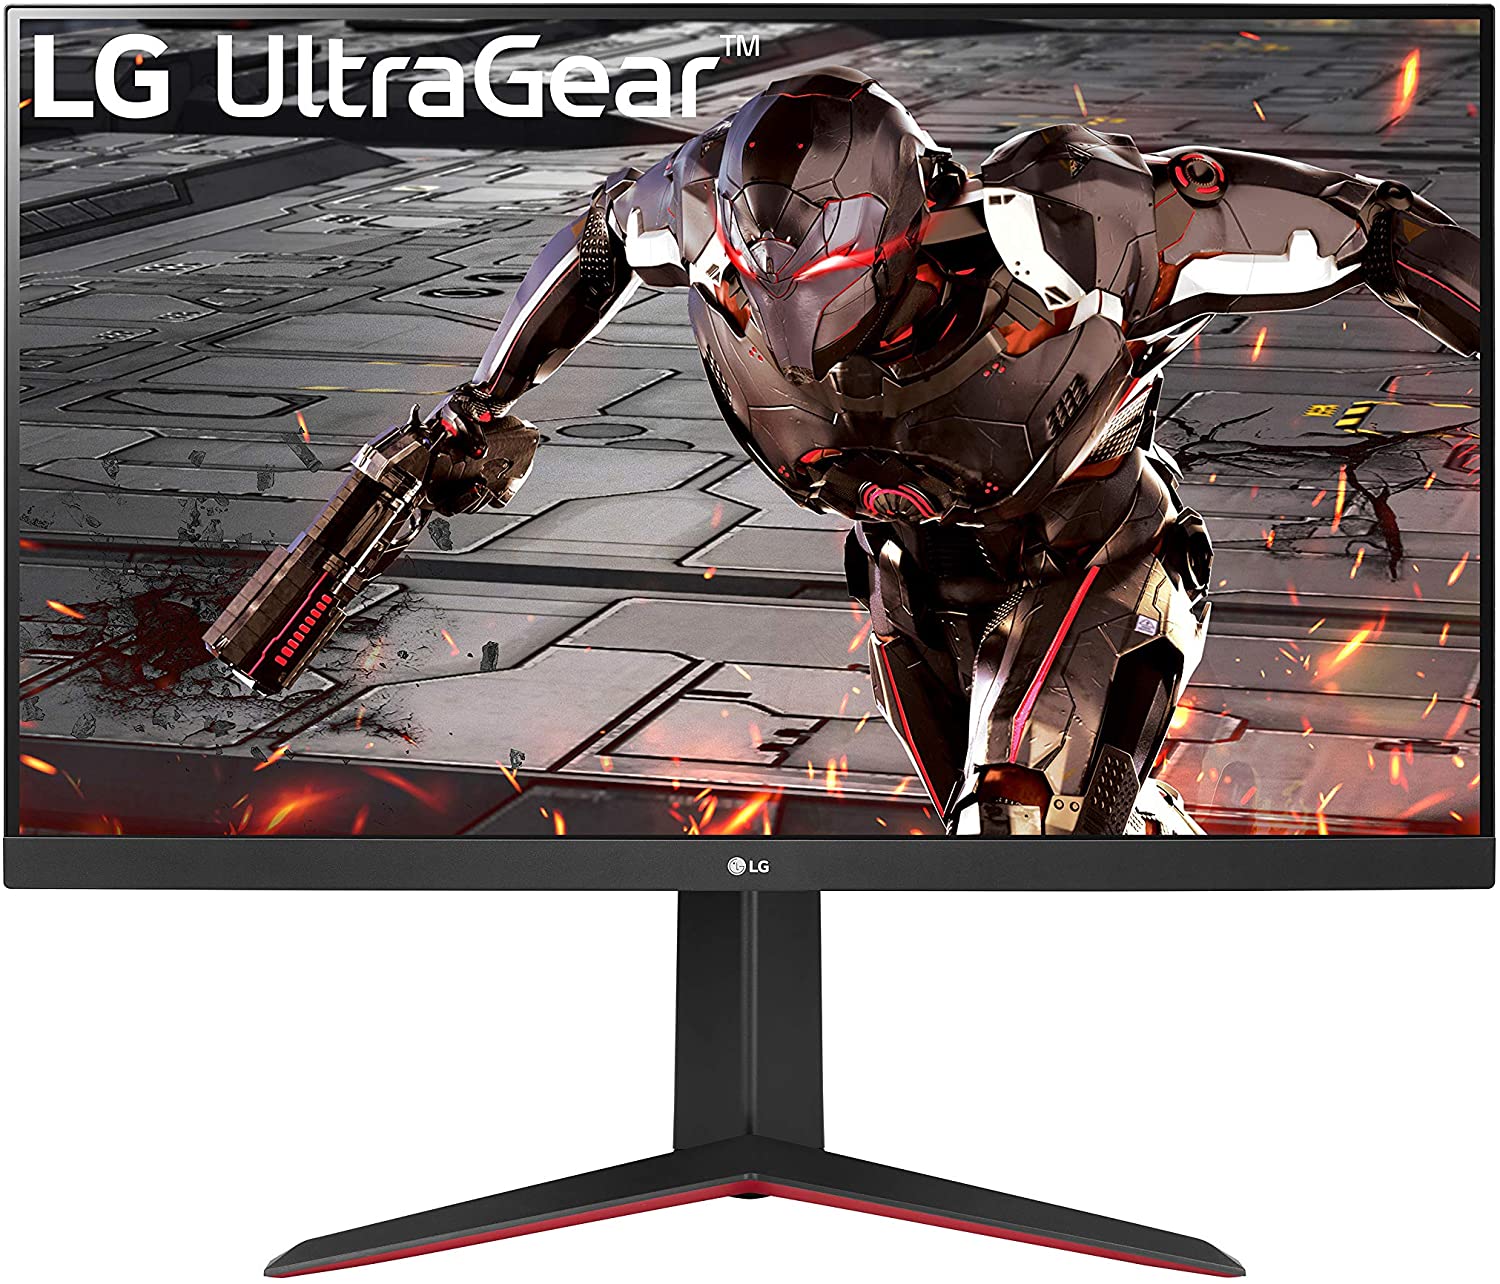 LG 32GN650-B 32” Ultragear QHD (2560 x 1440) Gaming Monitor with 165Hz Refresh Rate with 1ms Motion Blur Reduction, HDR 10 Support and AMD FreeSync – Black $296